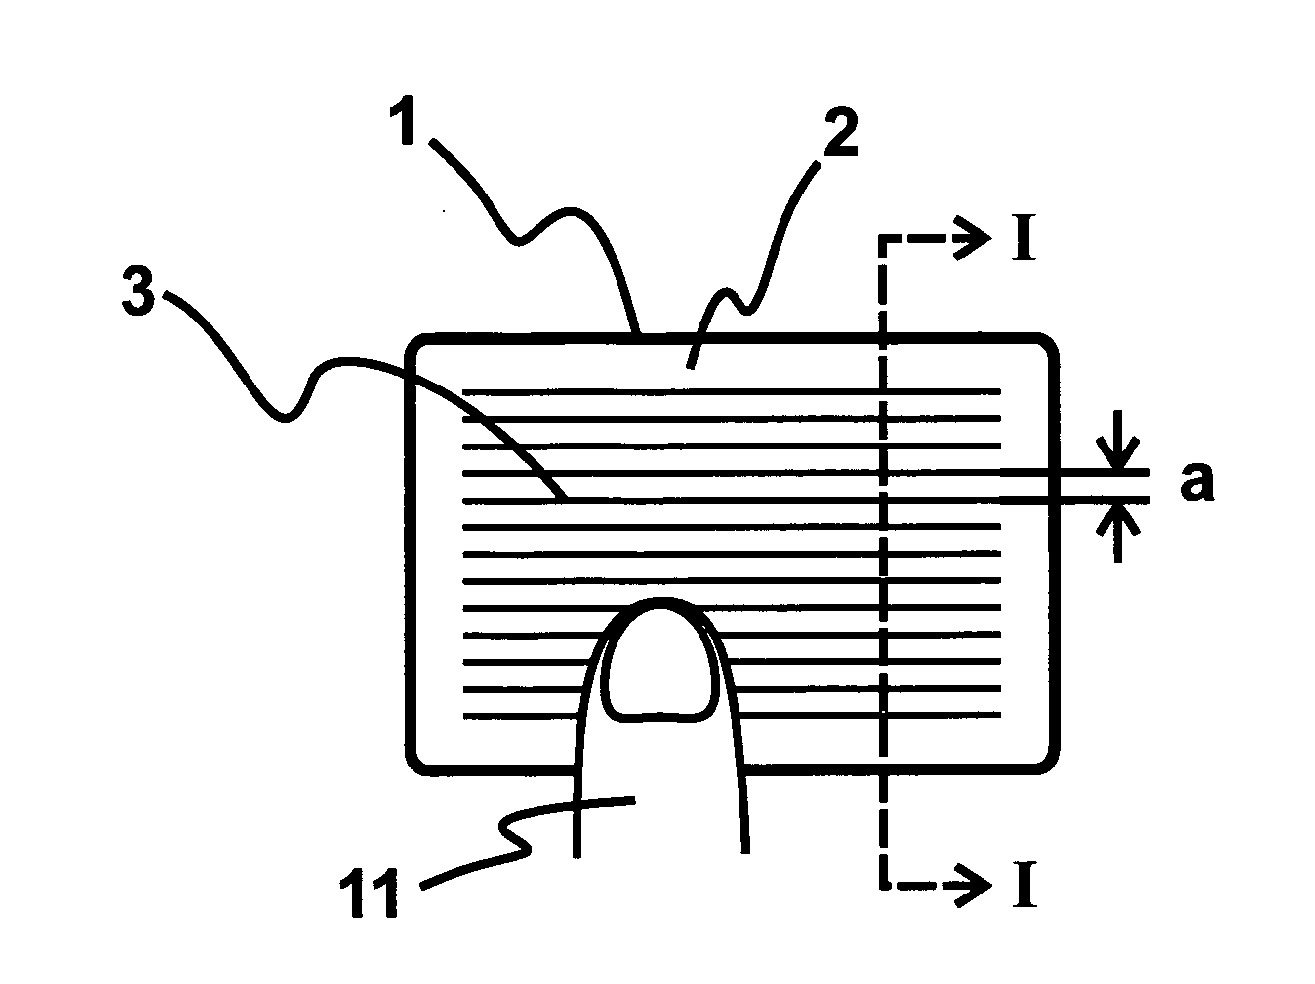 Touch-sensitive pointing device with guiding lines